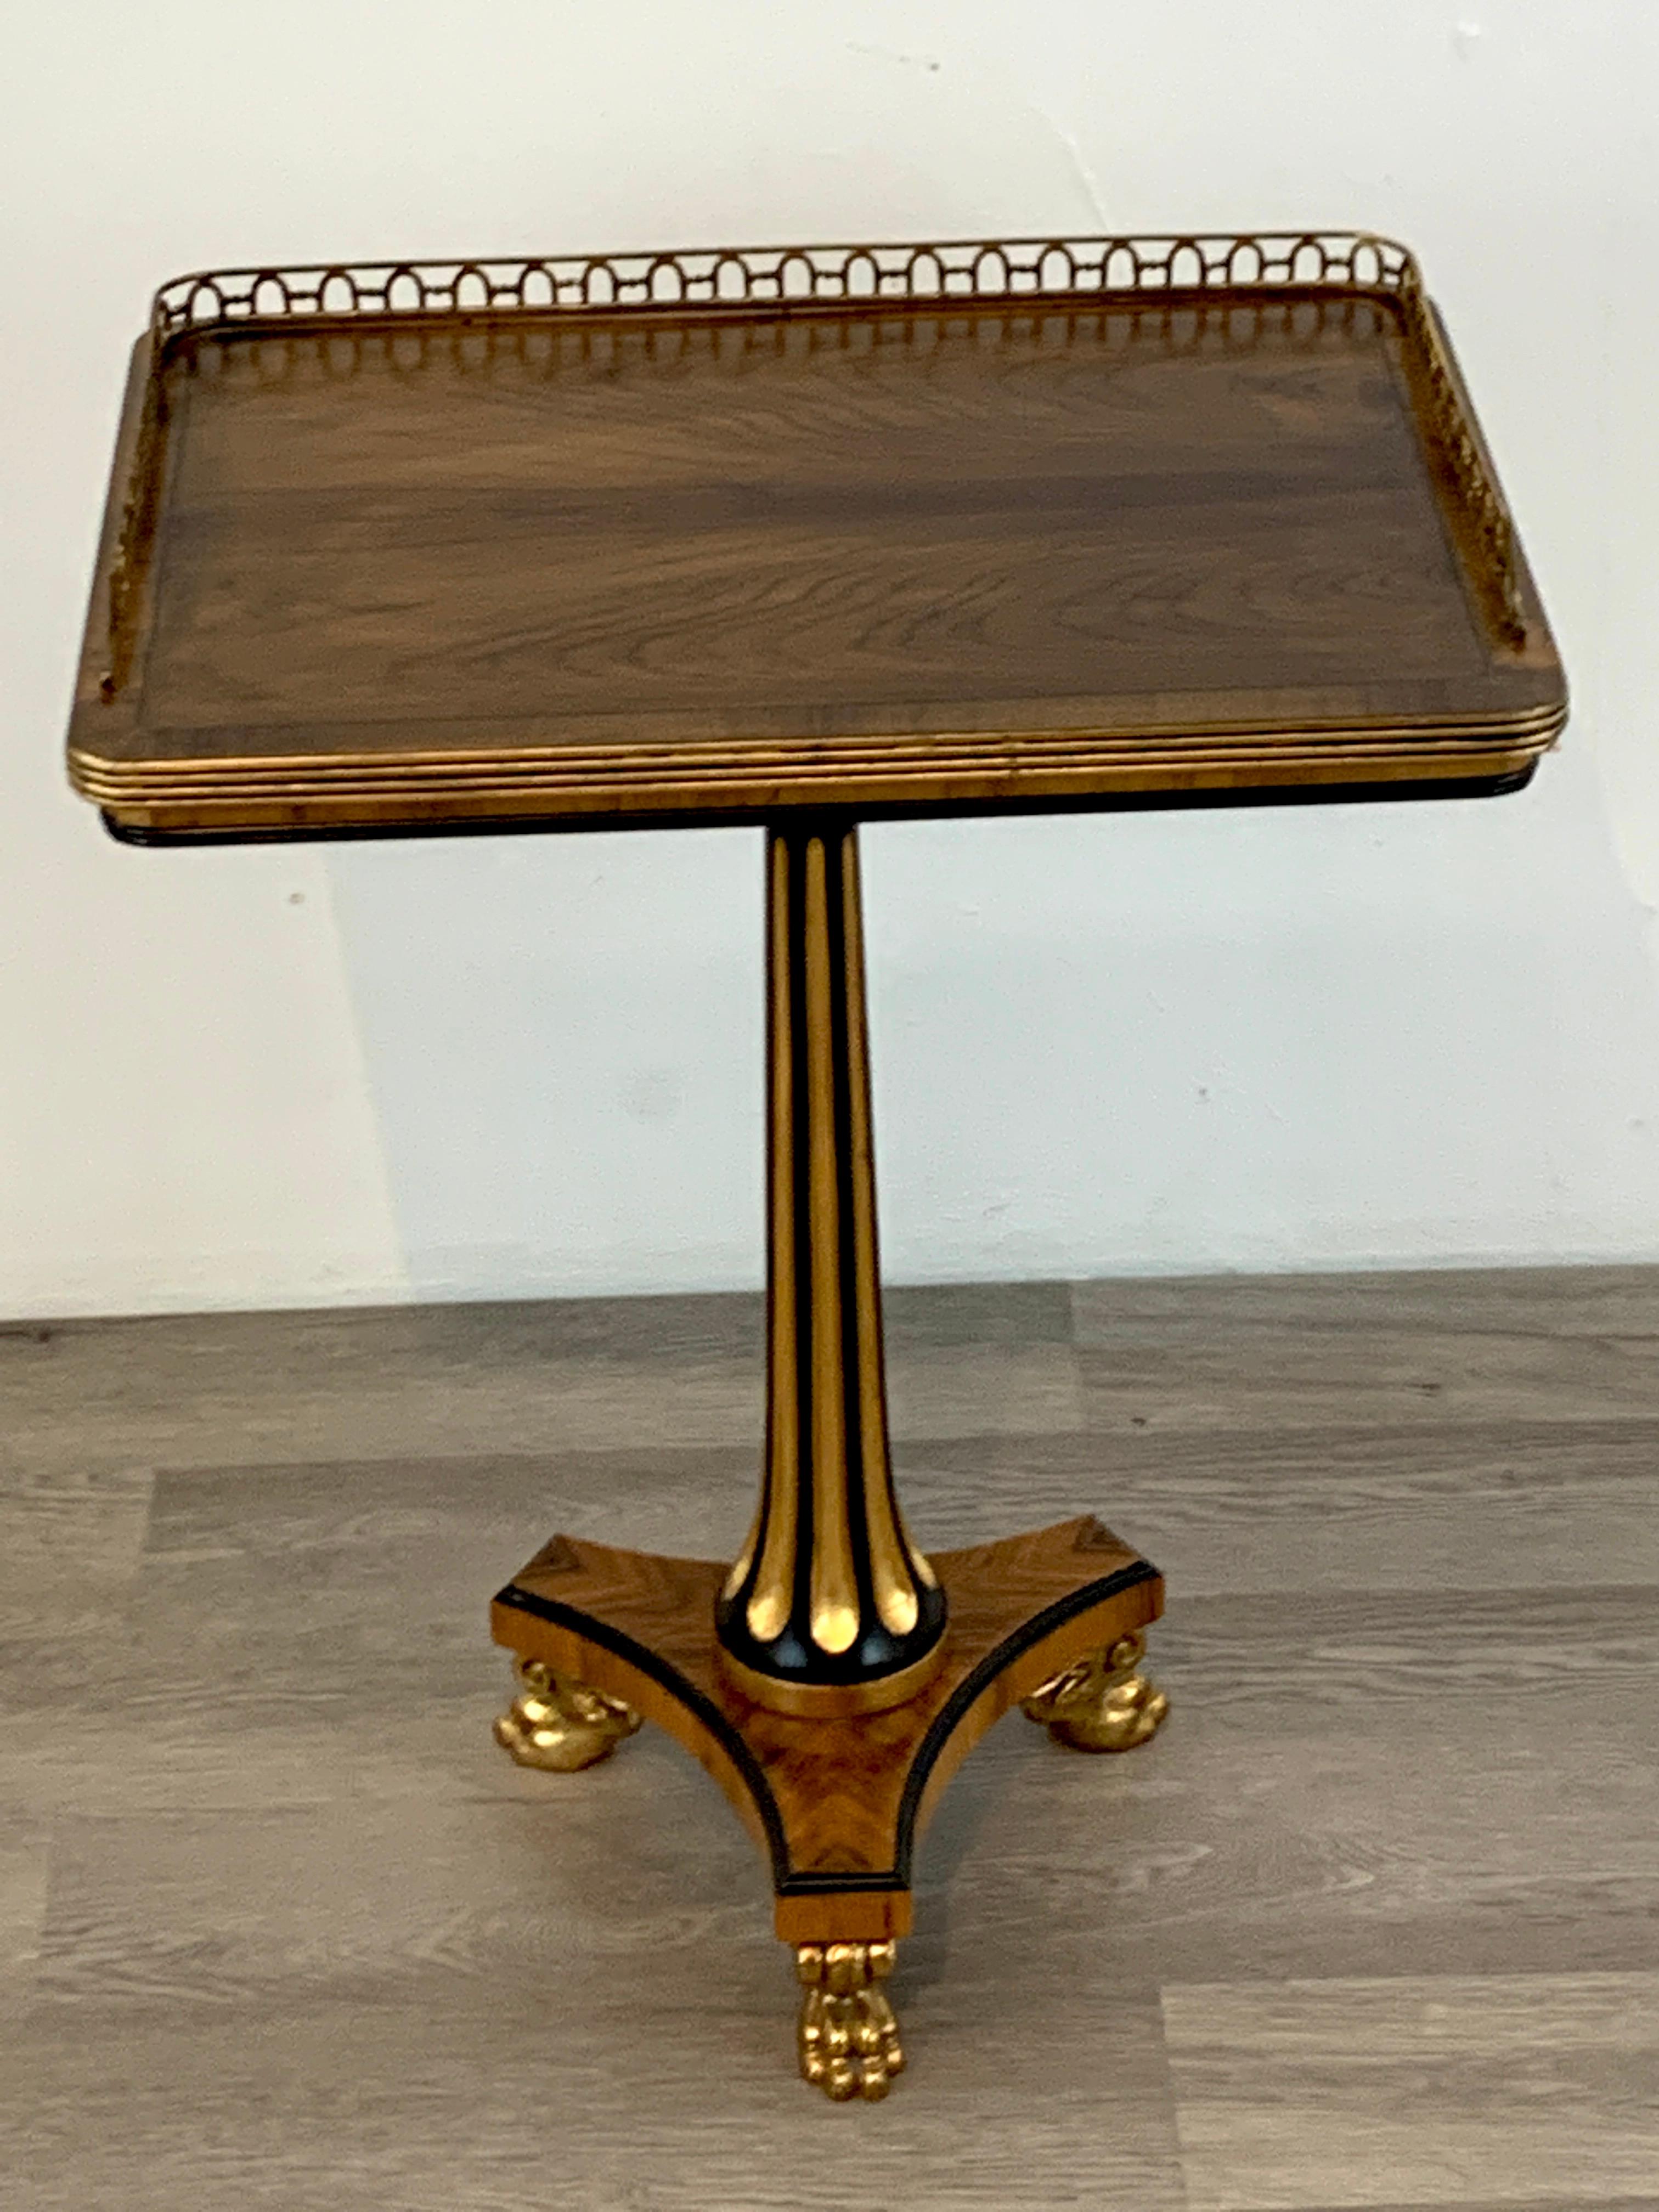 Stunning Regency style gilt bronze side table, Althorp, by Theo Alexander
A fine variation of Althorp Living History by Theodore Alexander, an older more detailed version of tables available now. Beautiful Morado wood, resembles rosewood, black and